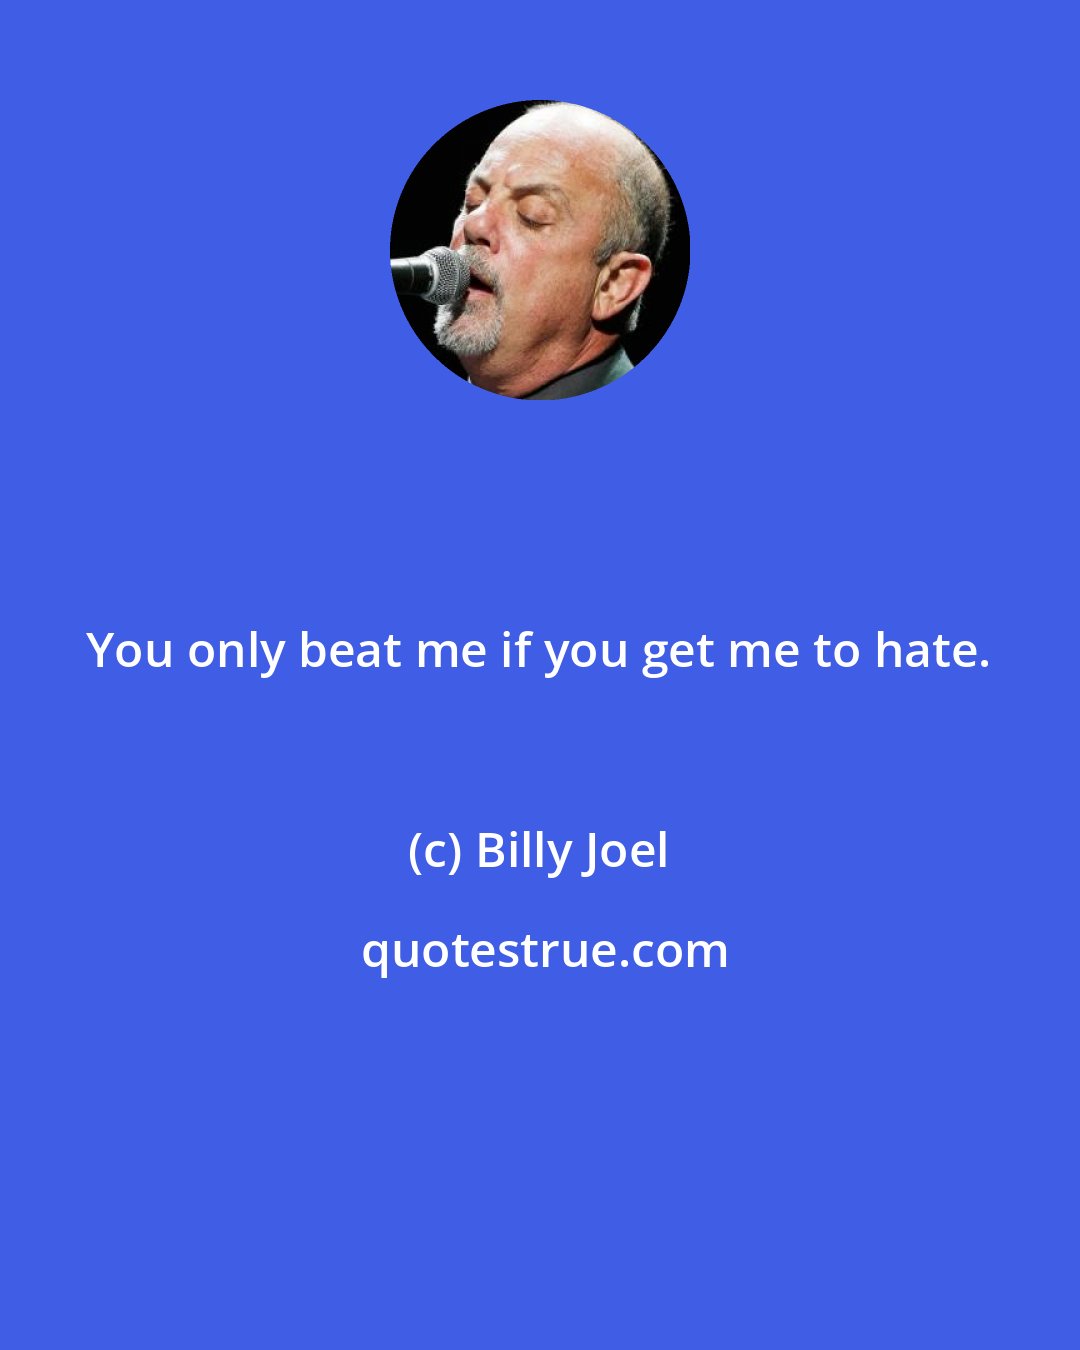 Billy Joel: You only beat me if you get me to hate.